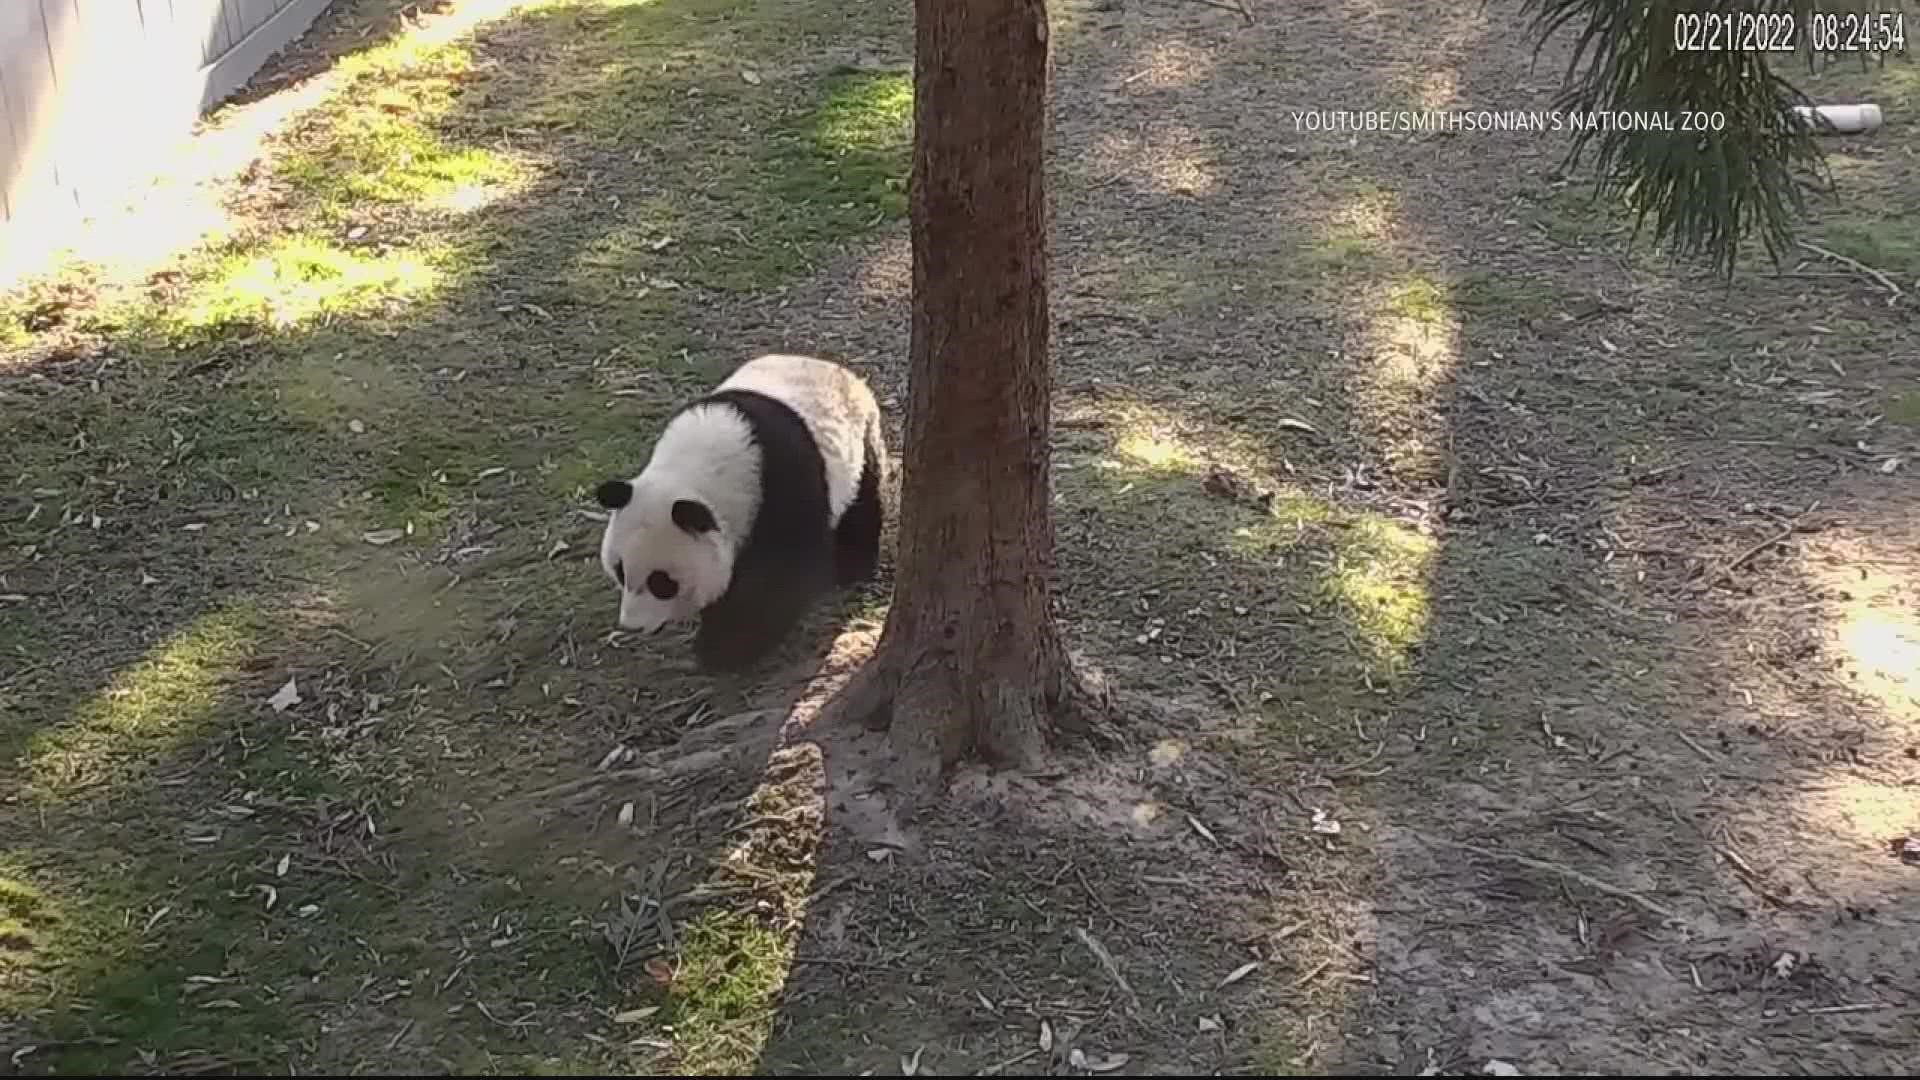 The pandas will get a special "fruitsicle" cake to celebrate Xiao Qi Ji's second birthday at the National Zoo.